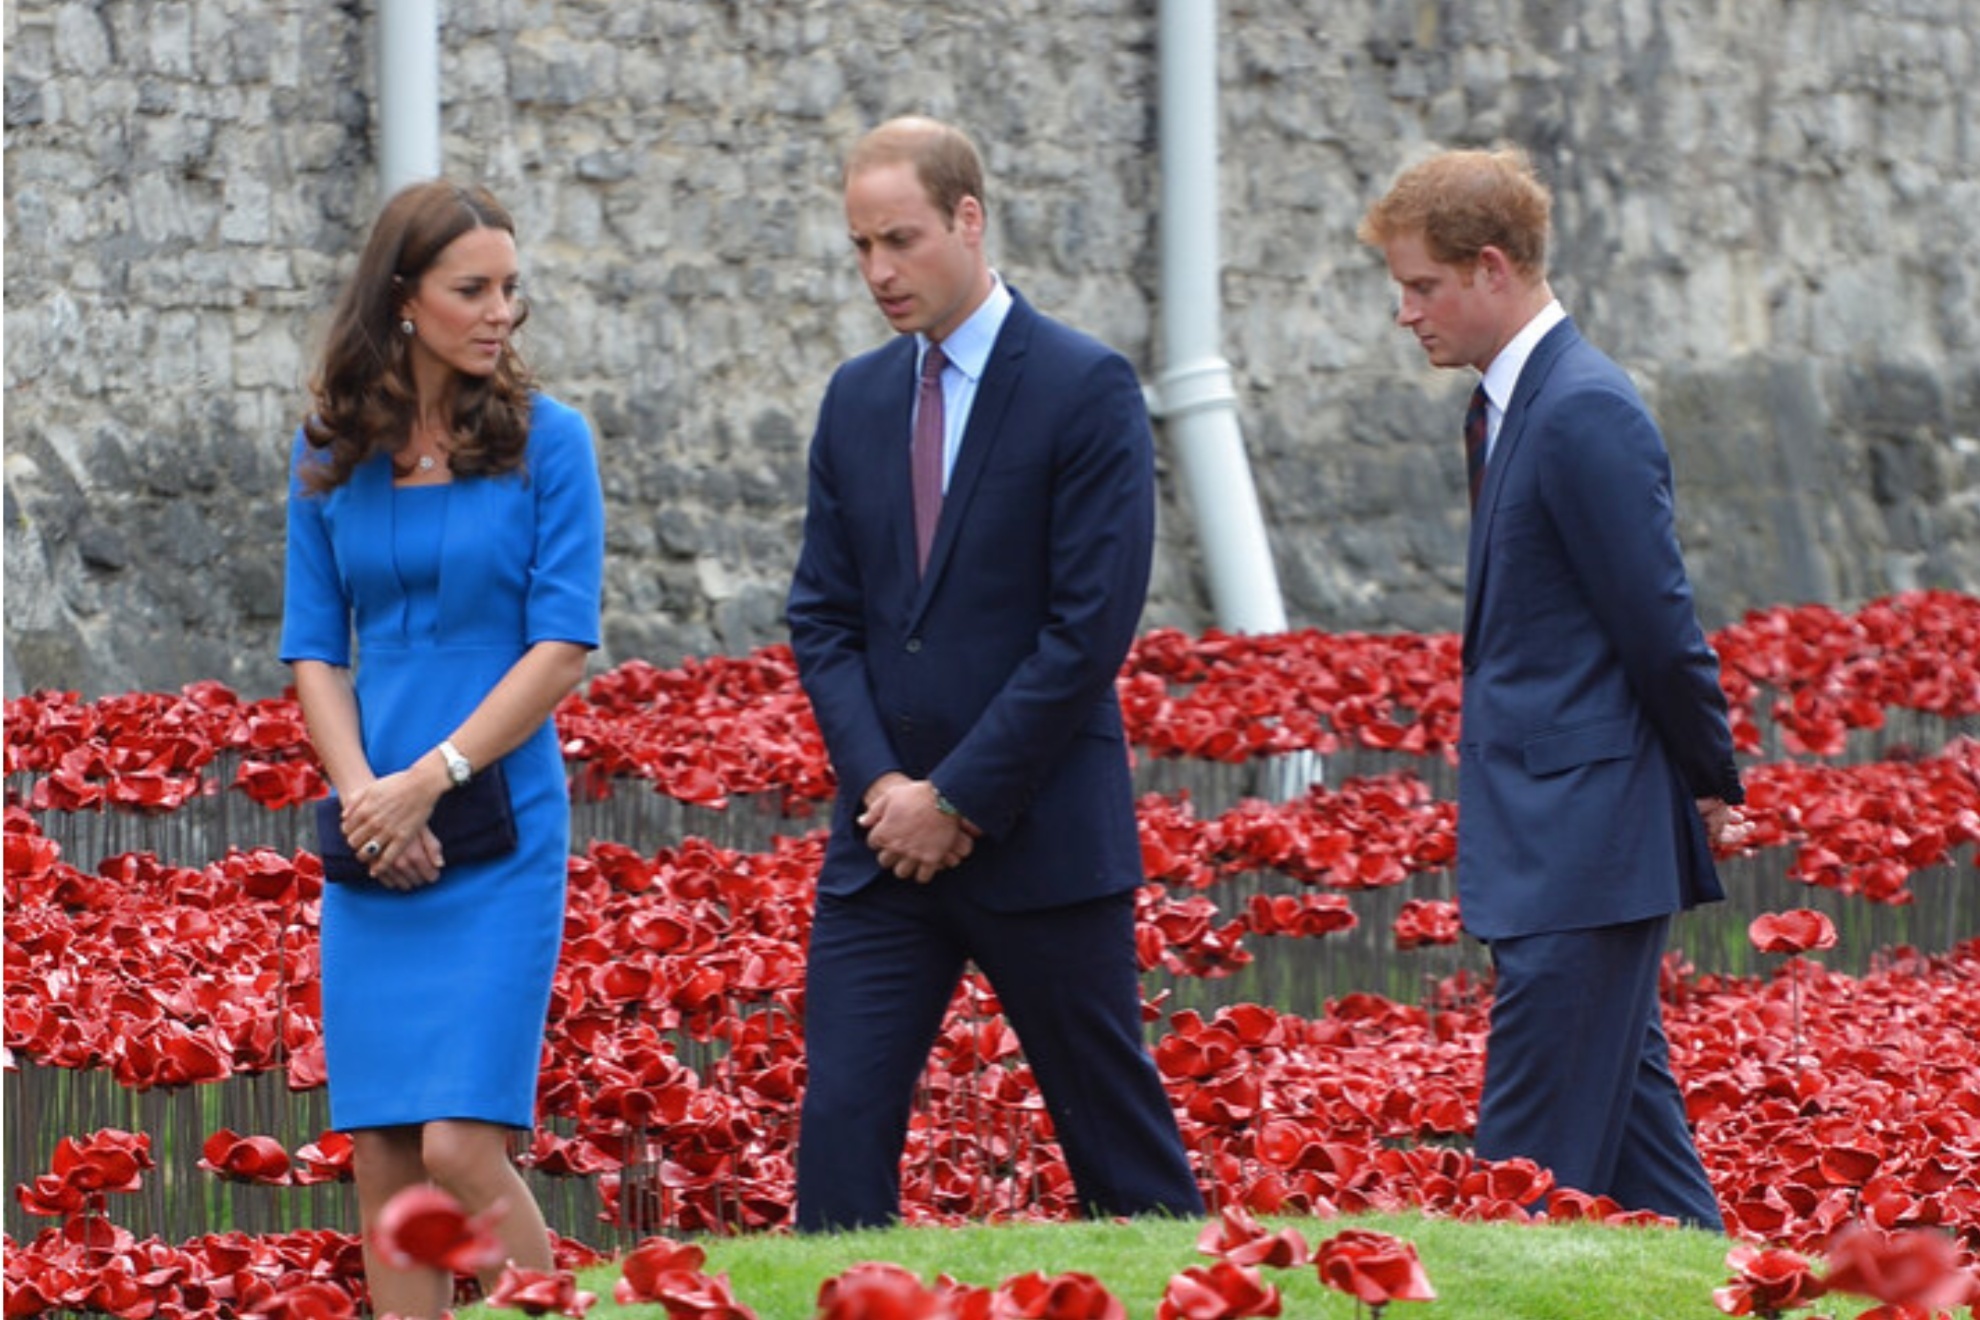 From left, Kate Middleton, Prince William, and Prince Harry in 2014 commemorating the 100th anniversary of the outbreak of WWI.